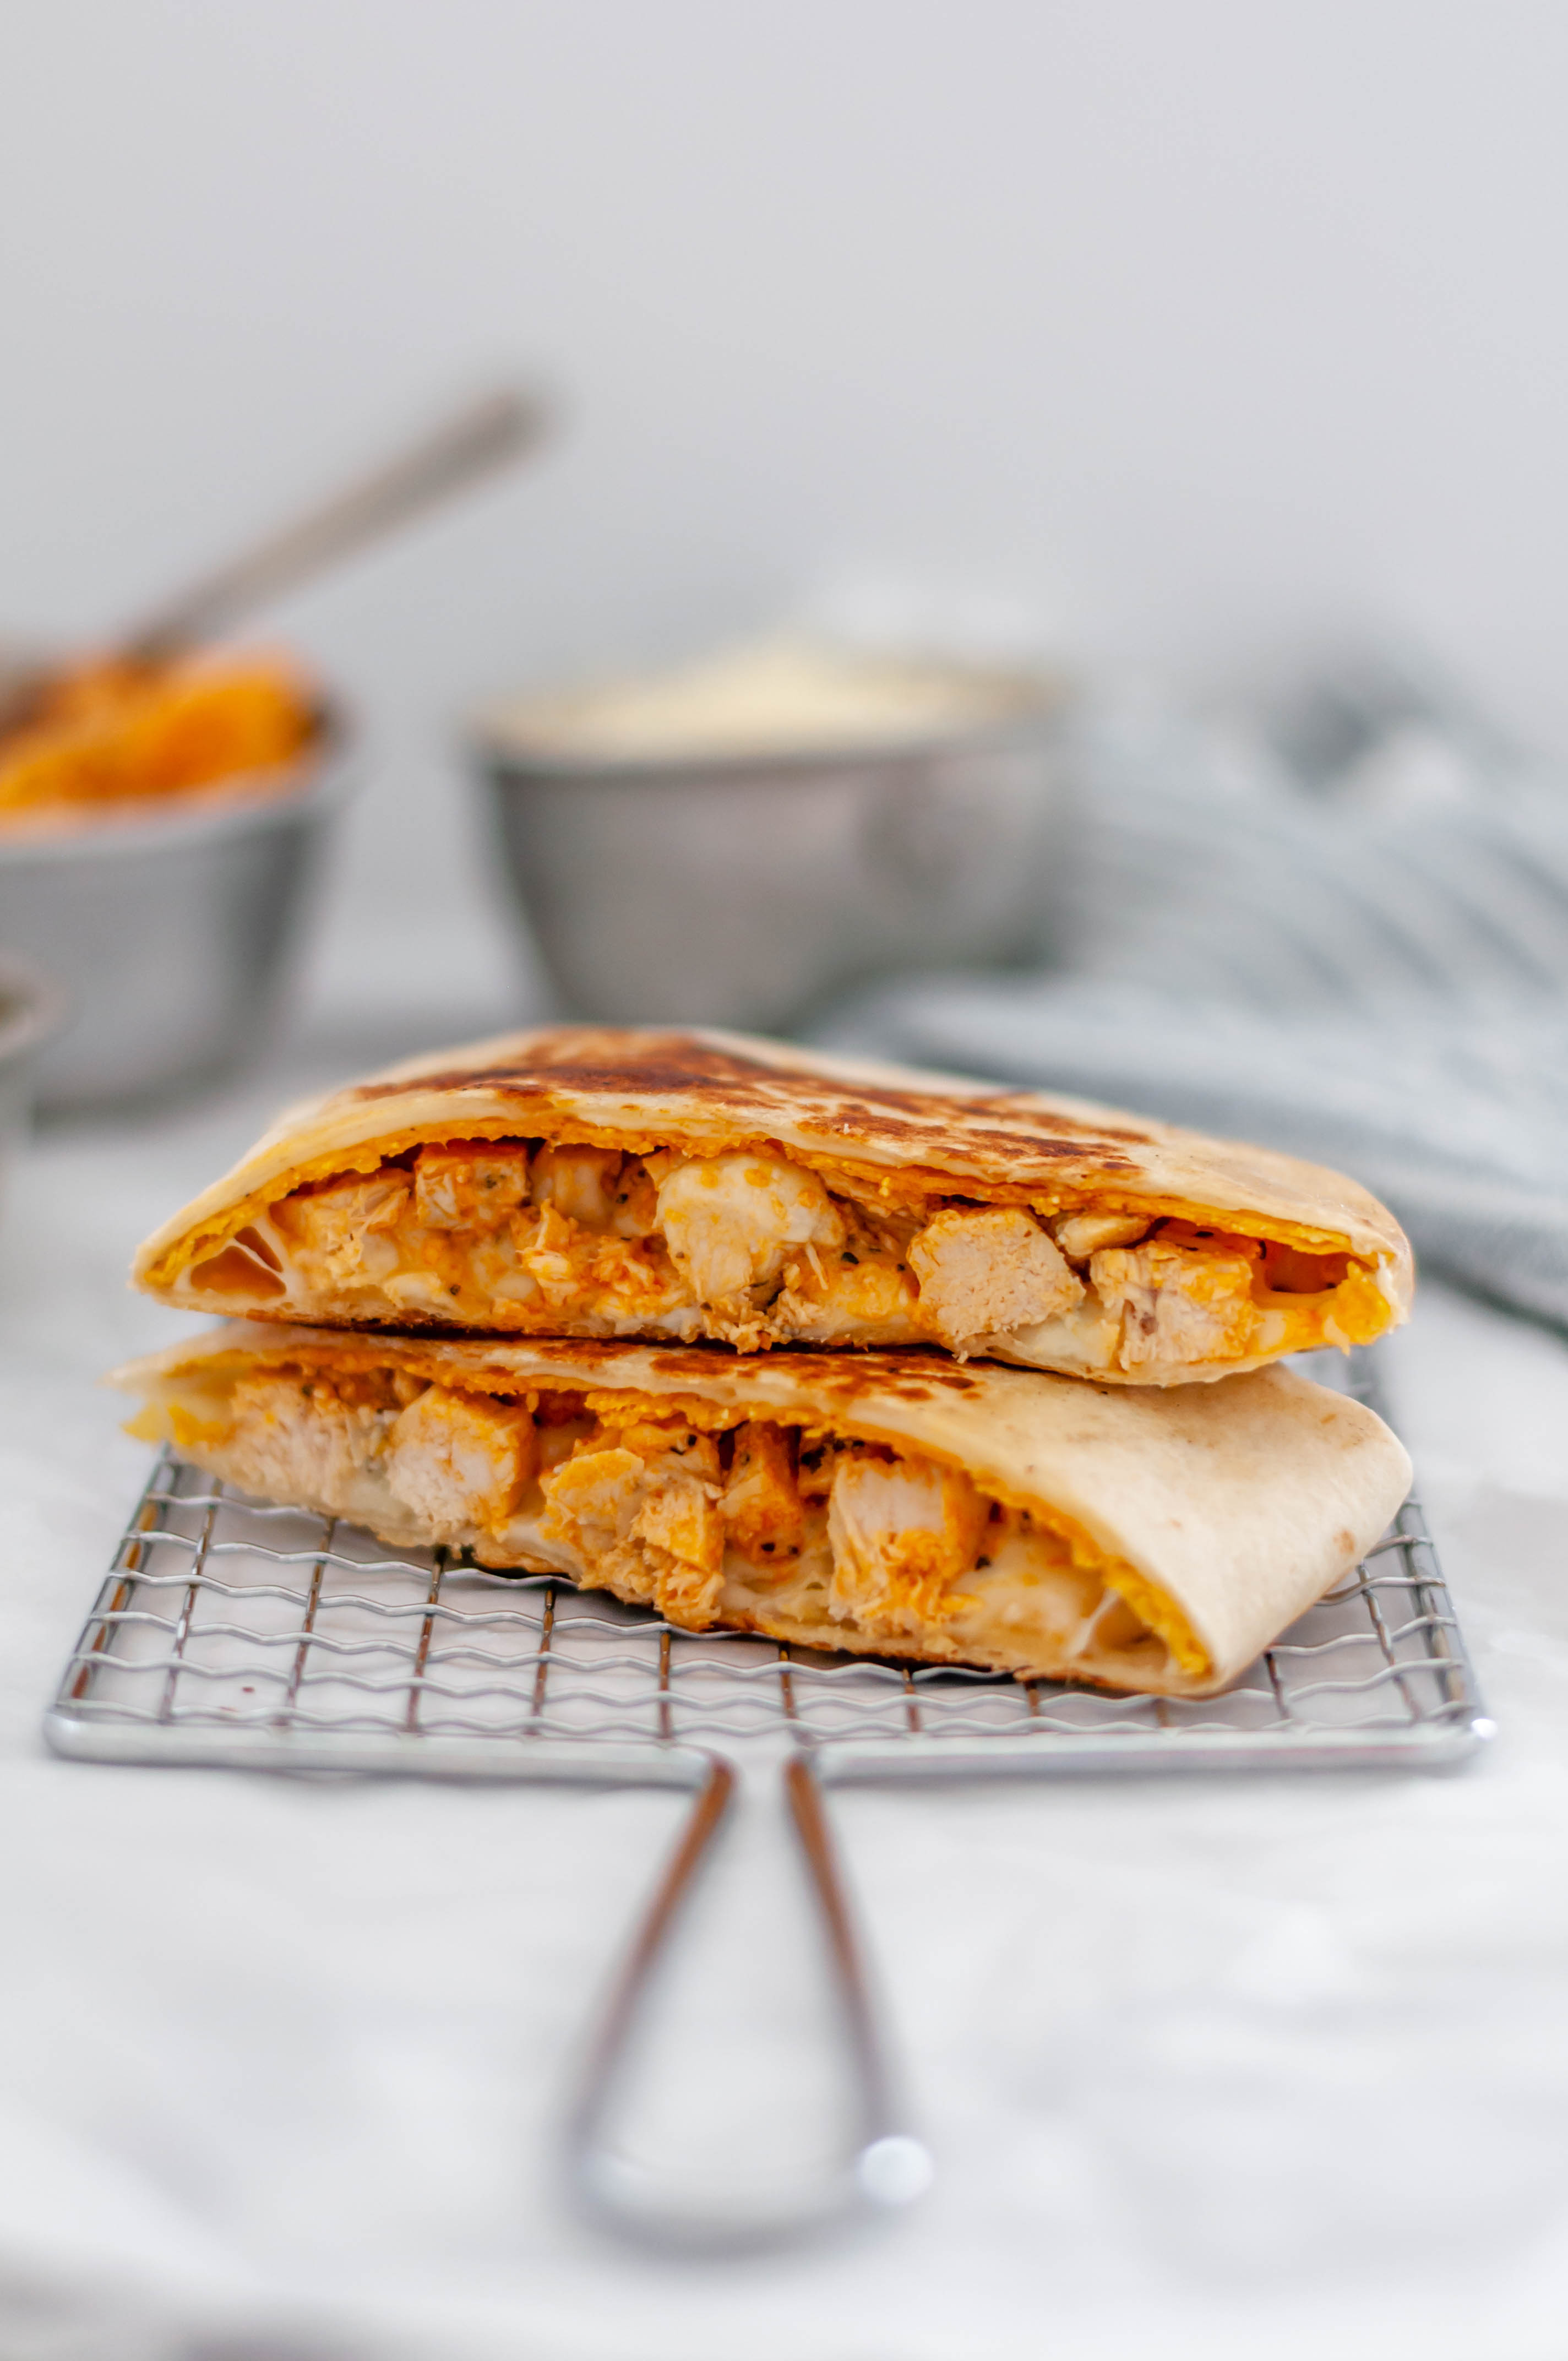 Meet your new craving, the Buffalo Chicken Crunch Wraps. Spicy buffalo chicken, mozzarella cheese, blue cheese and a crispy tostada shell all wrapped up in a soft flour tortilla and cooked to crispy perfection.